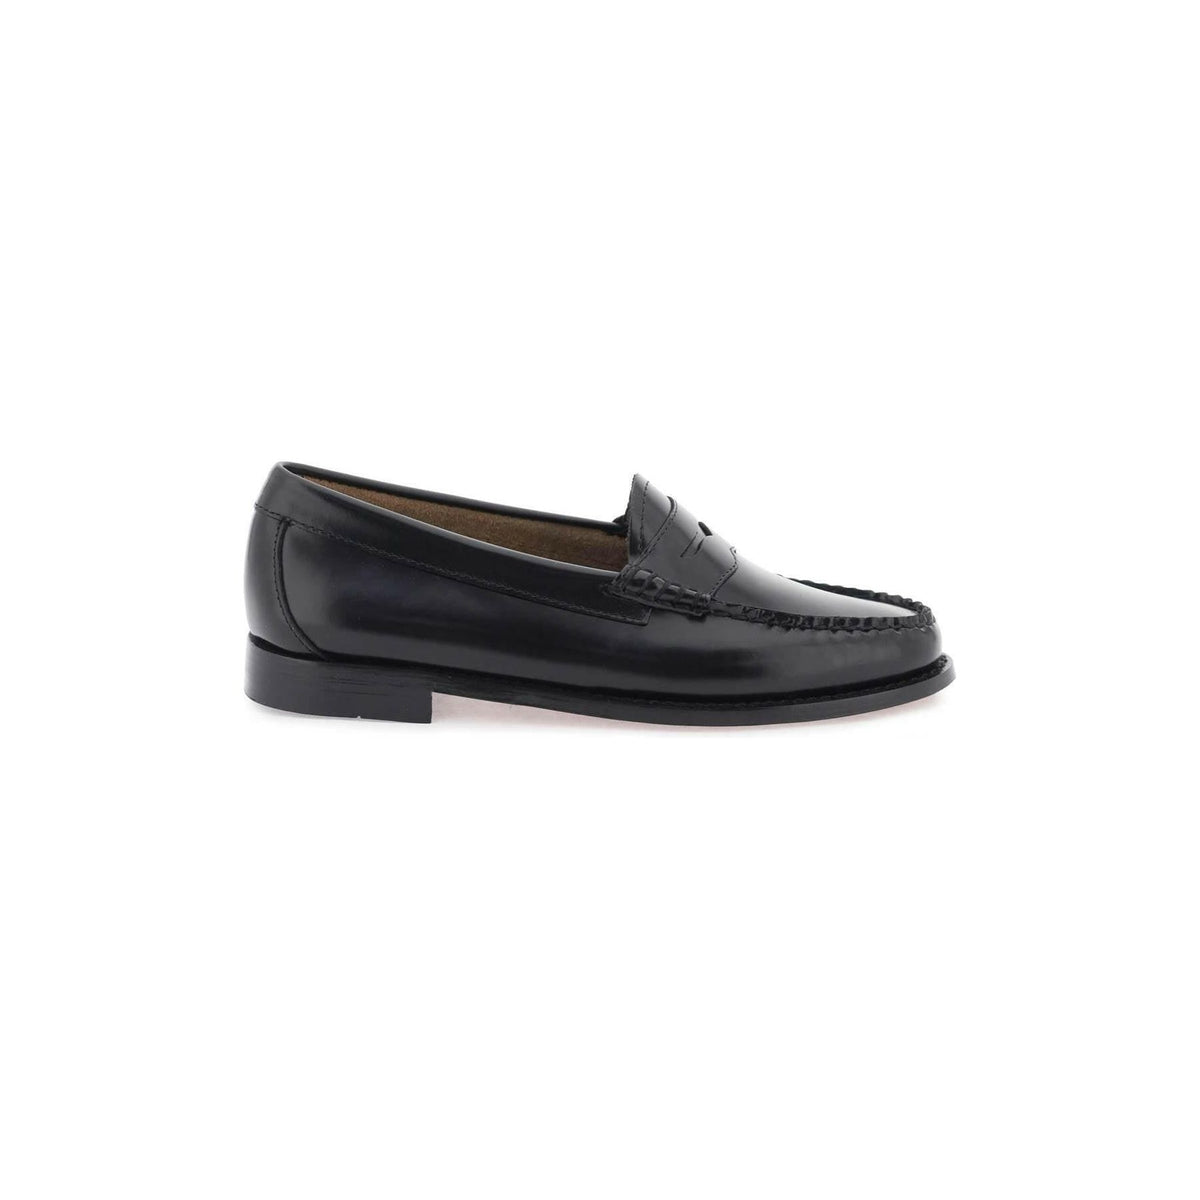 G.H. BASS - Black Handcrafted Leather Weejuns Penny Loafers - JOHN JULIA